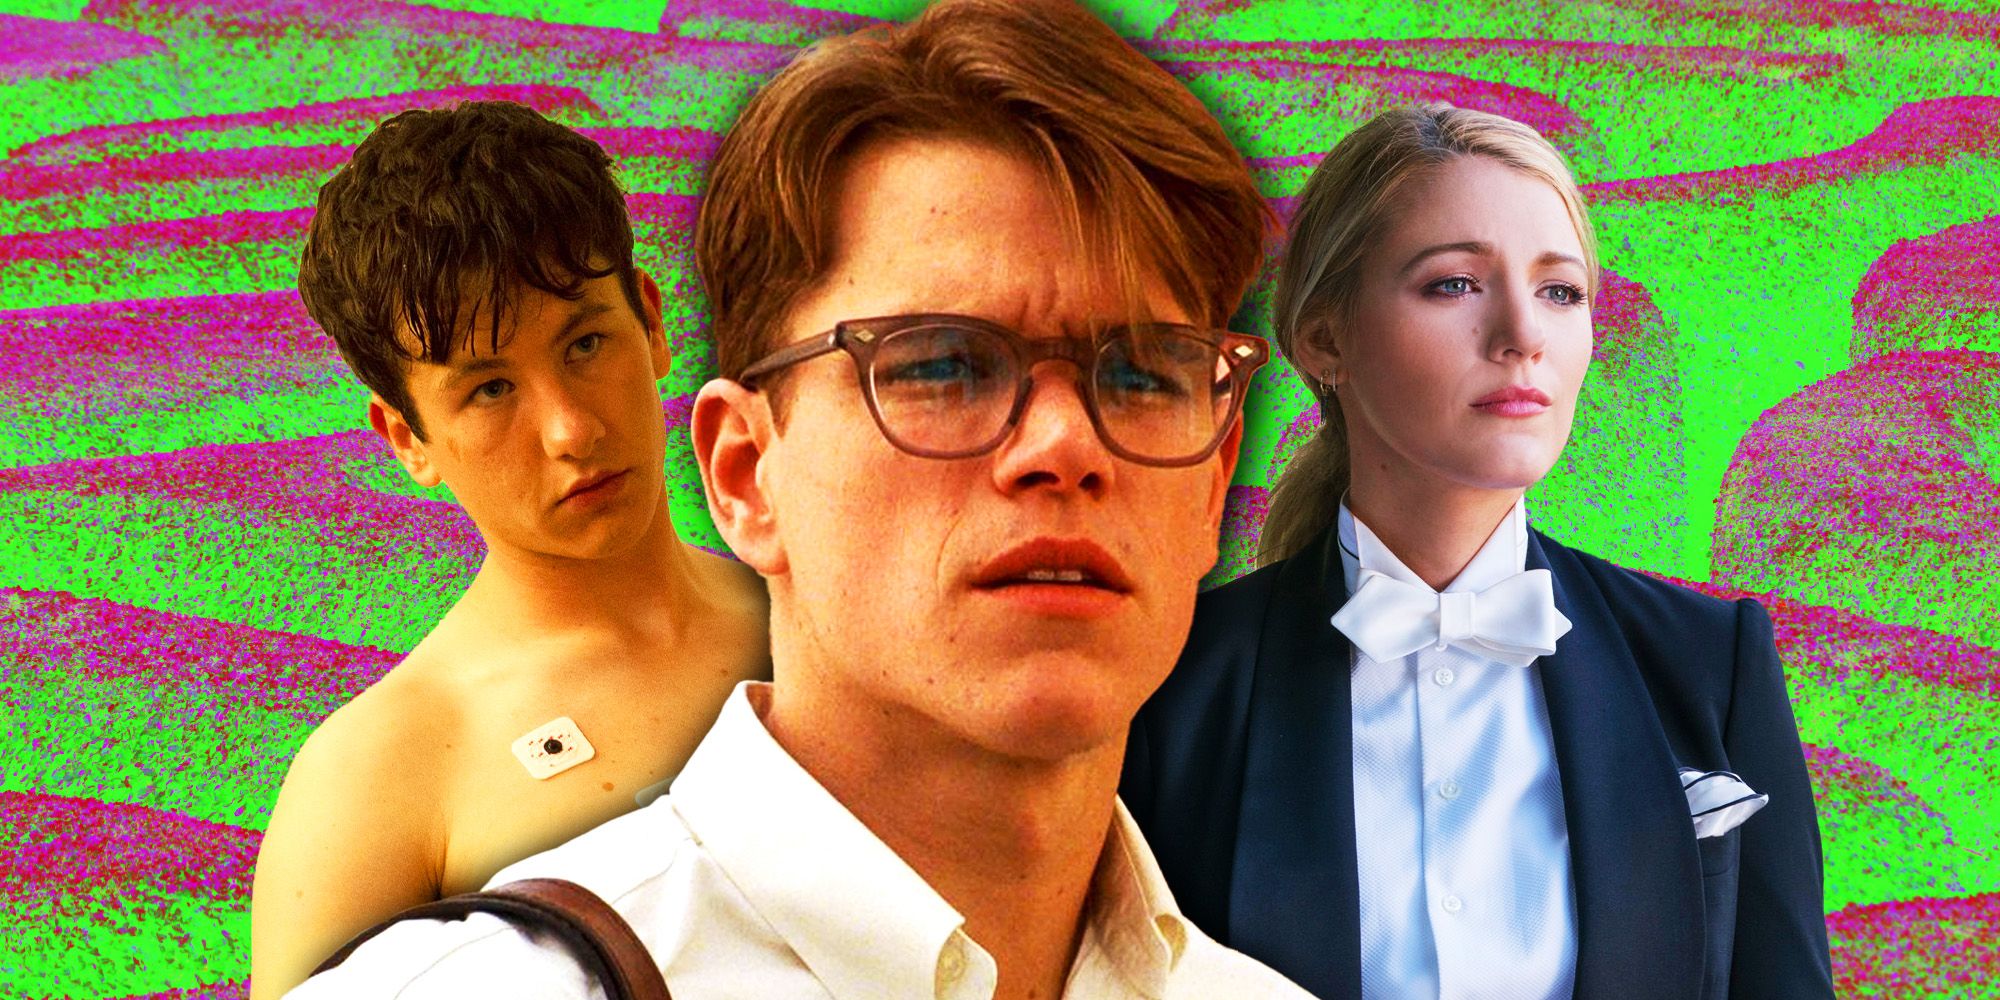 Collage of movies like Saltburn: Barry Keoghan in The Killing of a Sacred Deer, Matt Damon in The Talented Mr. Ripley, and Blake Lively in A Simple Favor